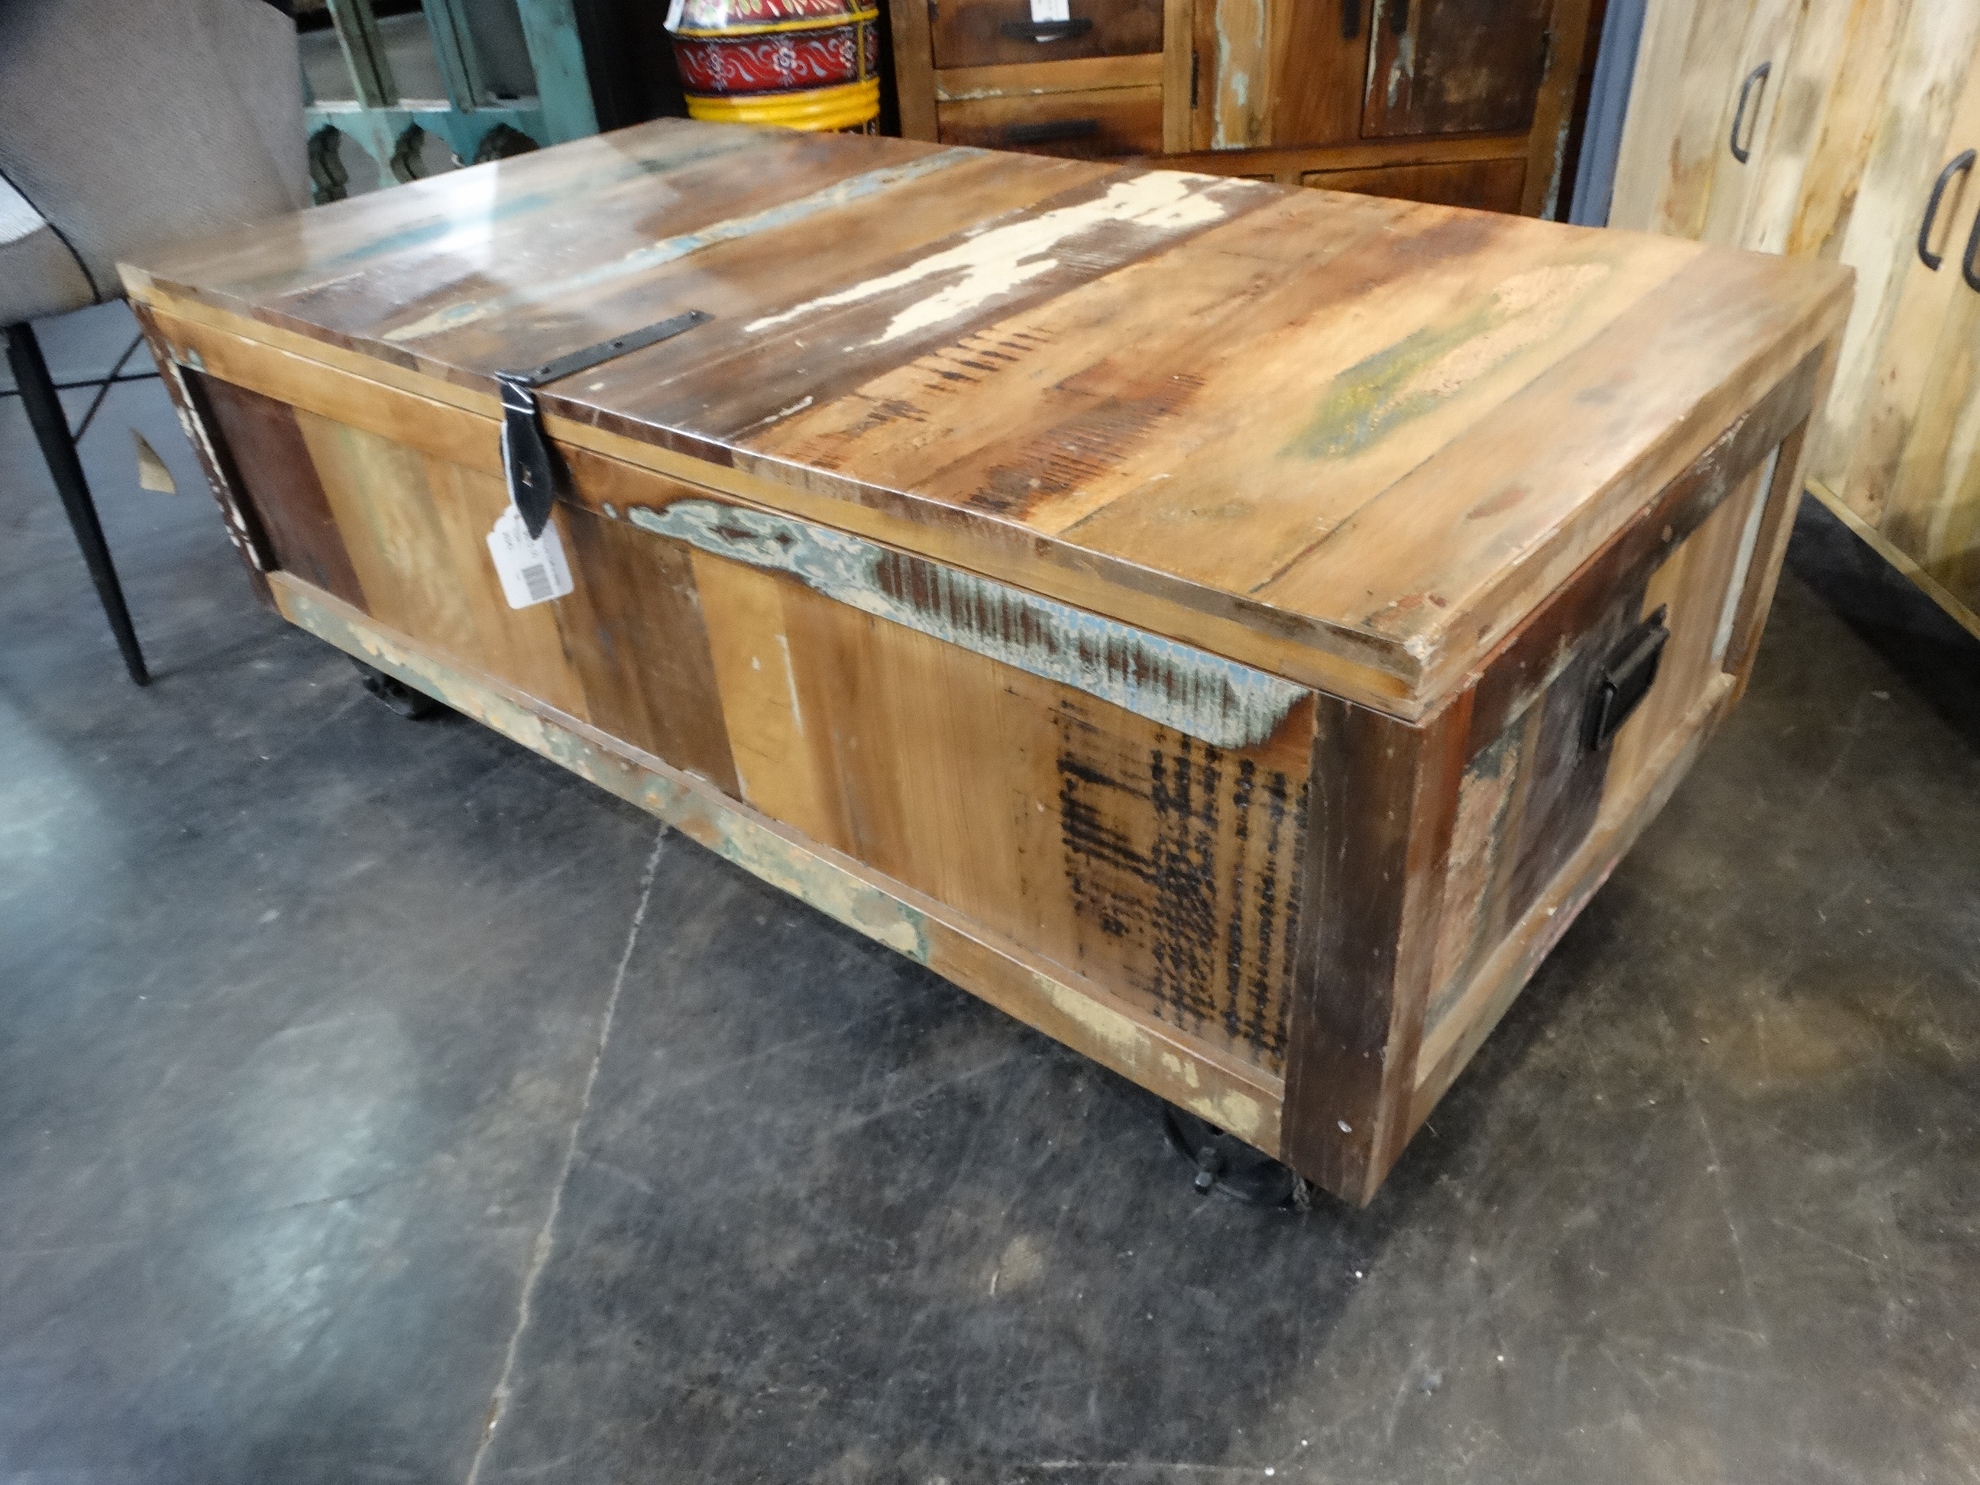 Chest Trunk Coffee Table Storage Box Part Reclaimed Wood 